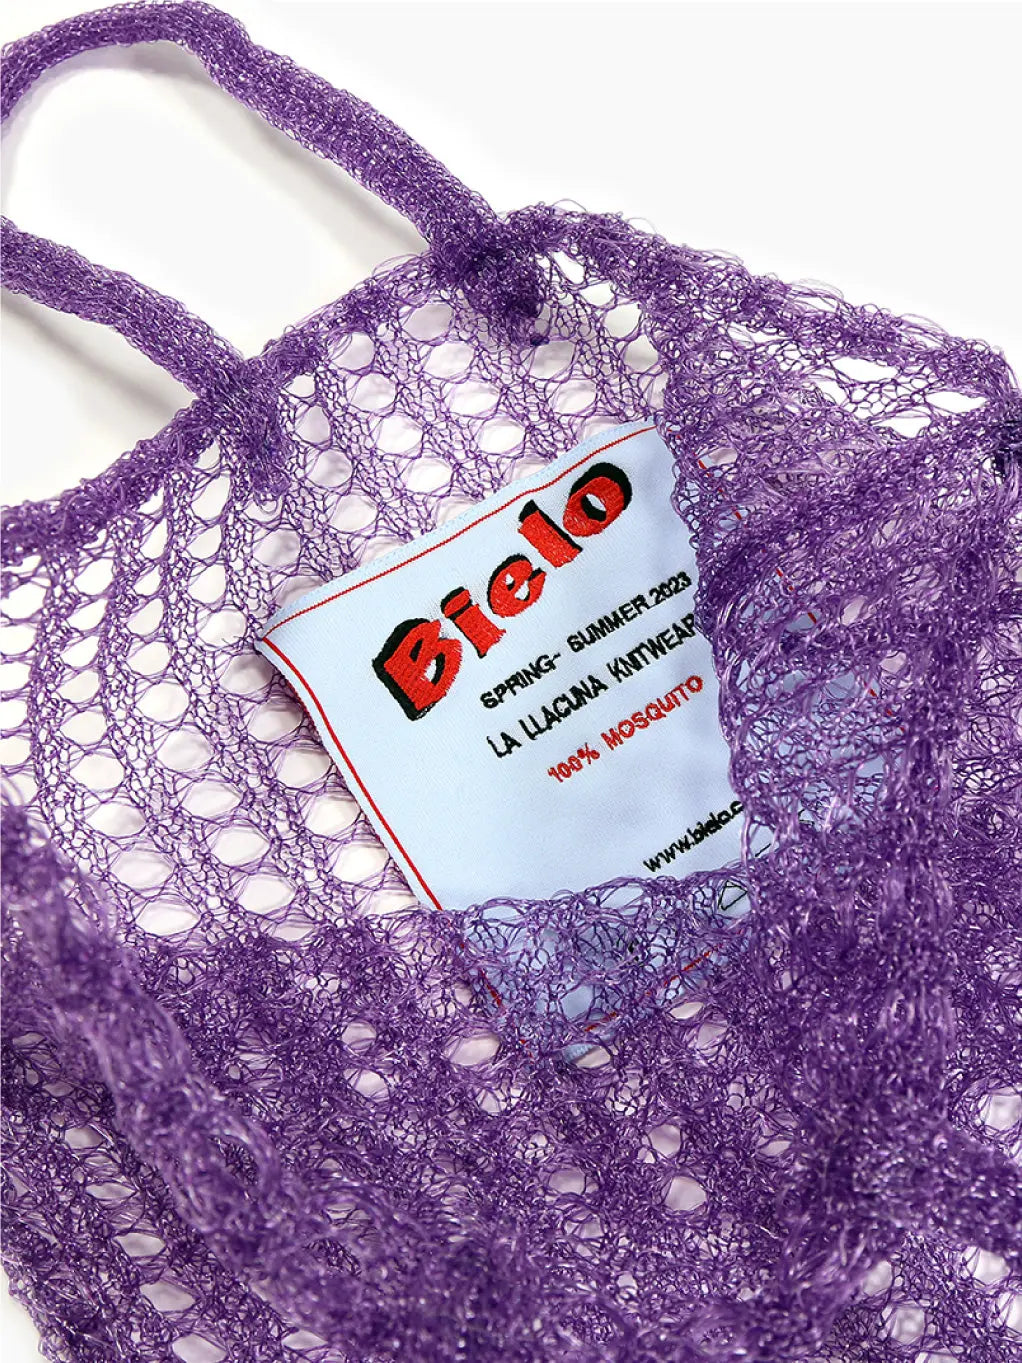 A purple, open-knit mesh market bag with two handles. The front features a white tag with red and black text, giving it a chic touch. This lightweight and stretchy bag is perfect for carrying groceries or other items—ideal for your next trip to the Barcelona store. Introducing the Bielo Mesh Tote Bag Lilac!